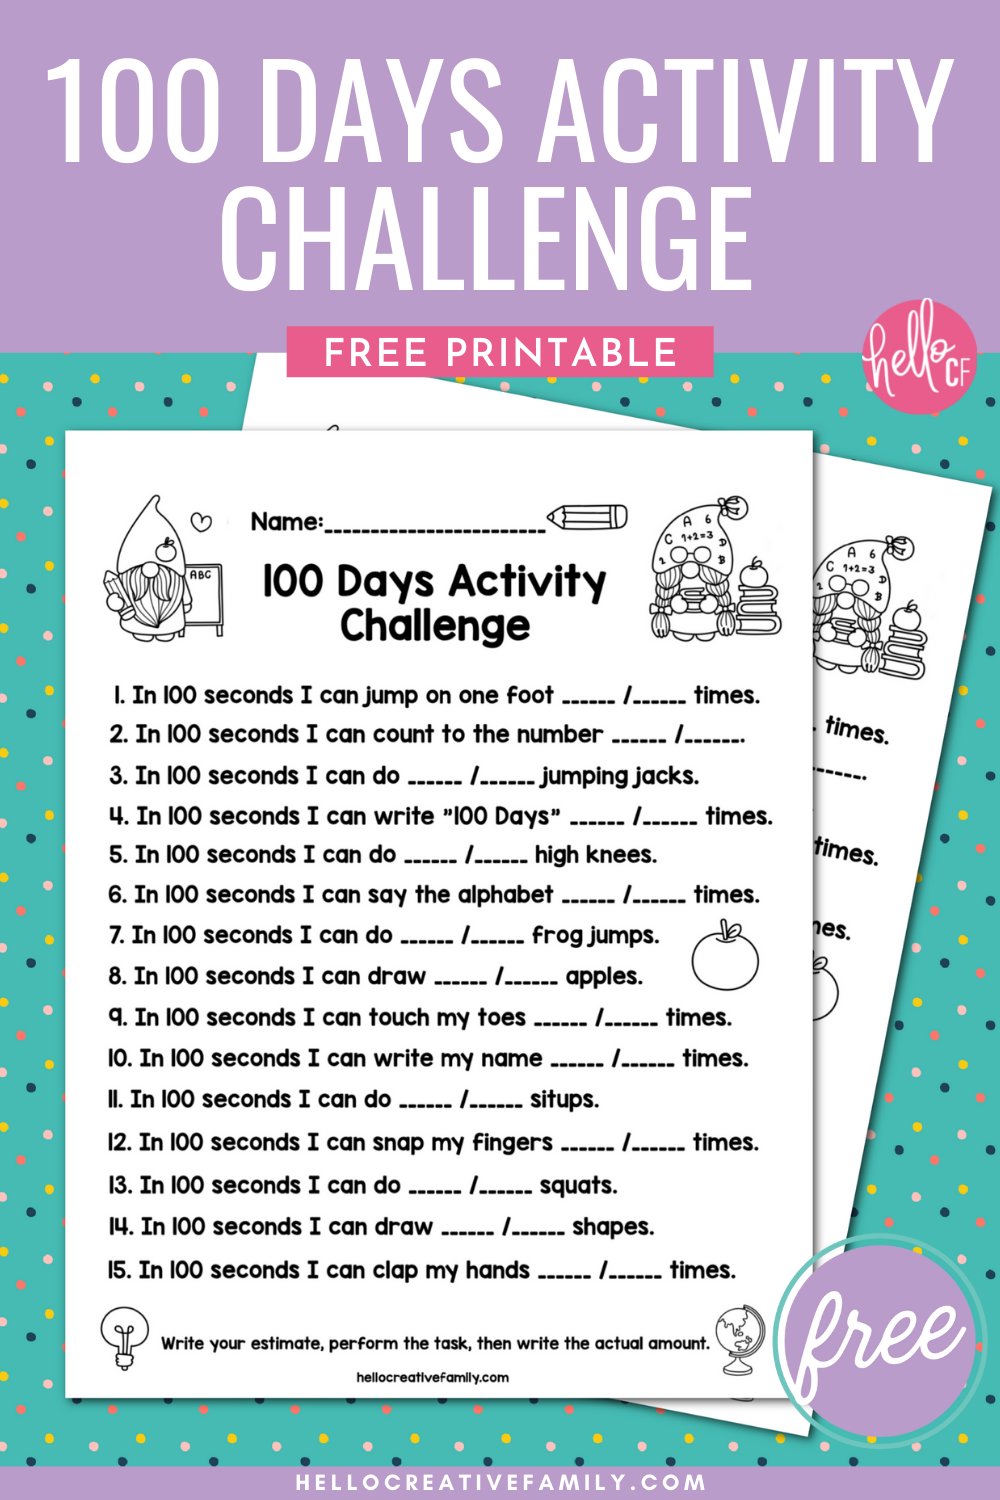 Looking for ways to make the 100 Day of School special? We're sharing loads of ideas that elementary school teachers will love including a 100 Days Activities Challenge that mixes math, writing and physical literacy along with 14 free 100 Day of School printables!